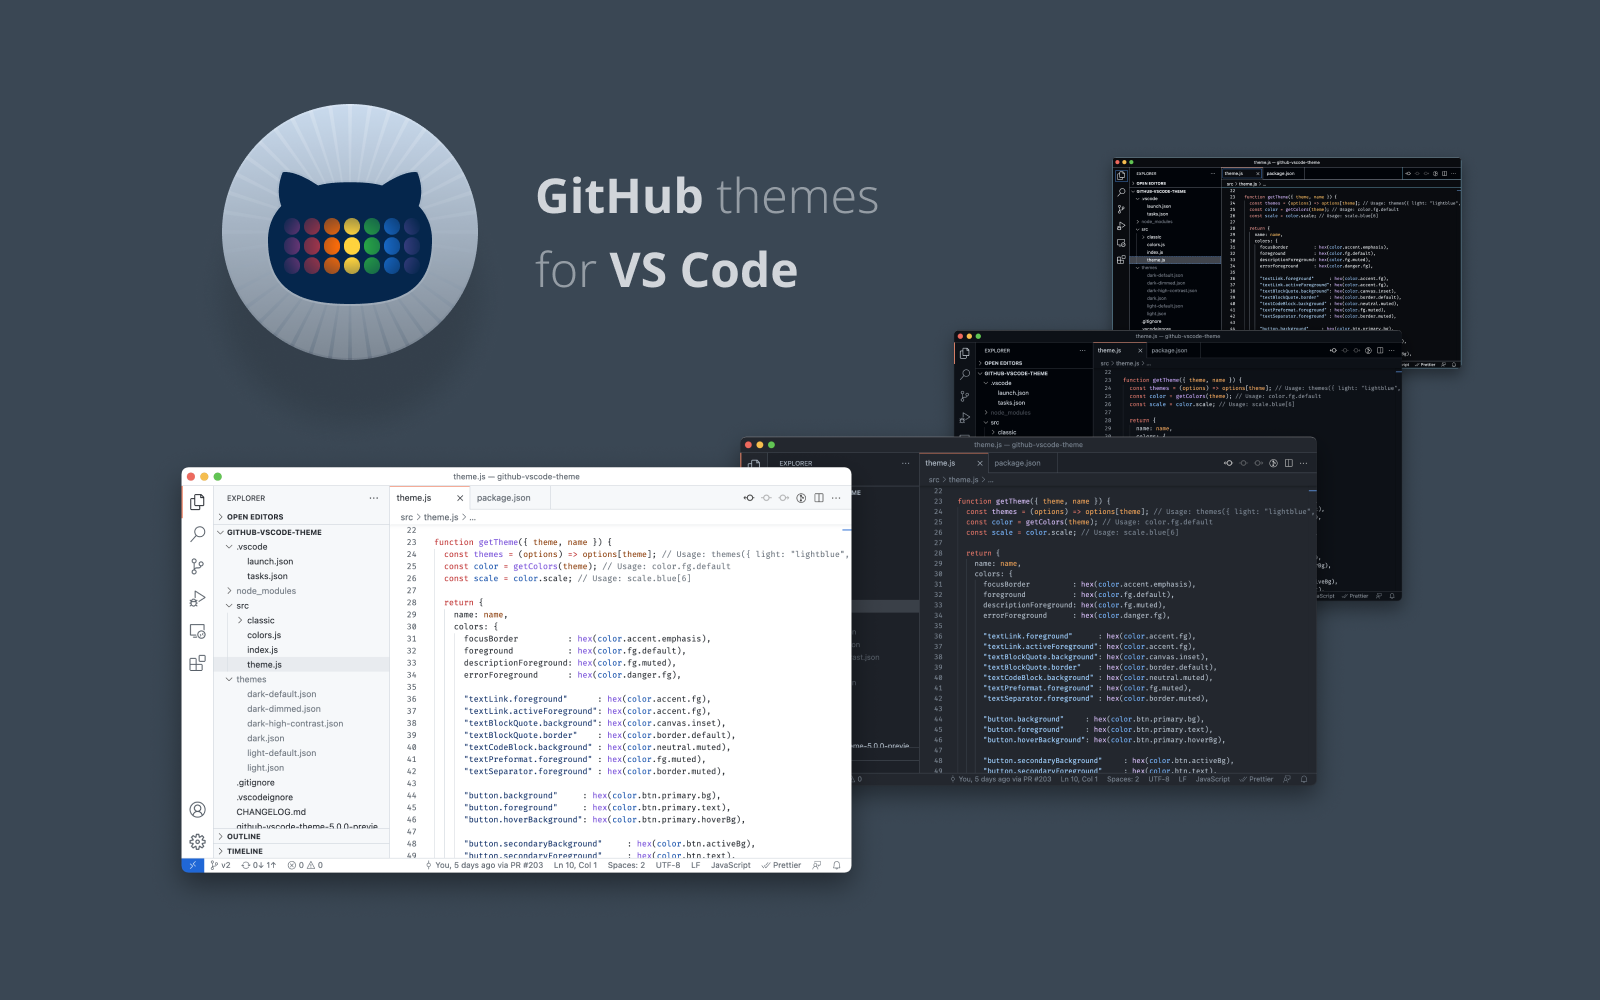 GitHub theme from VS Code Marketplace